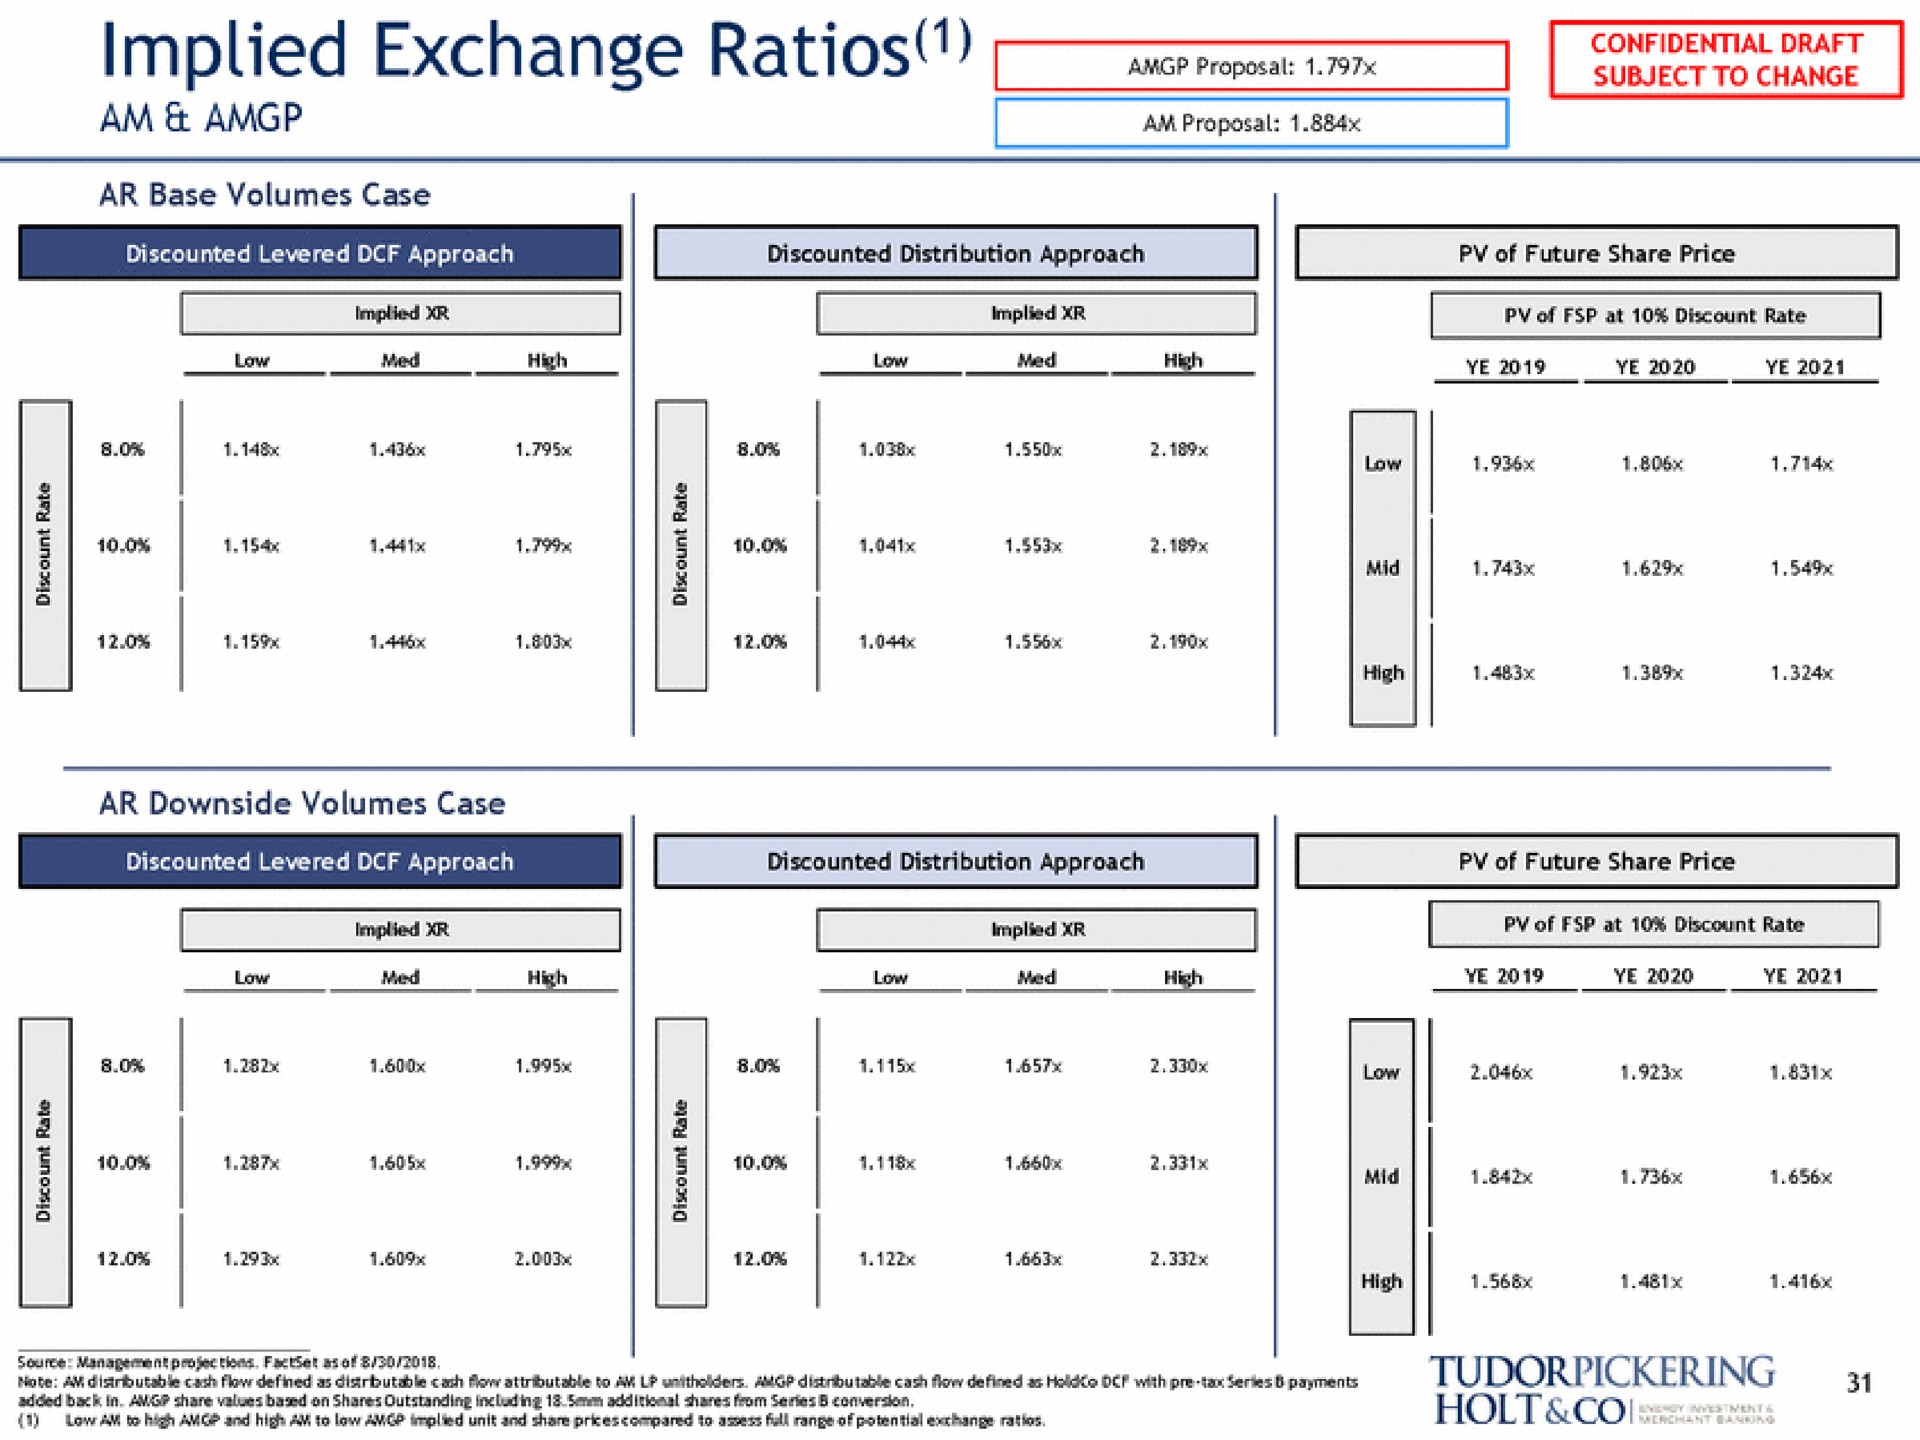 implied exchange ratios am see | Tudor, Pickering, Holt & Co